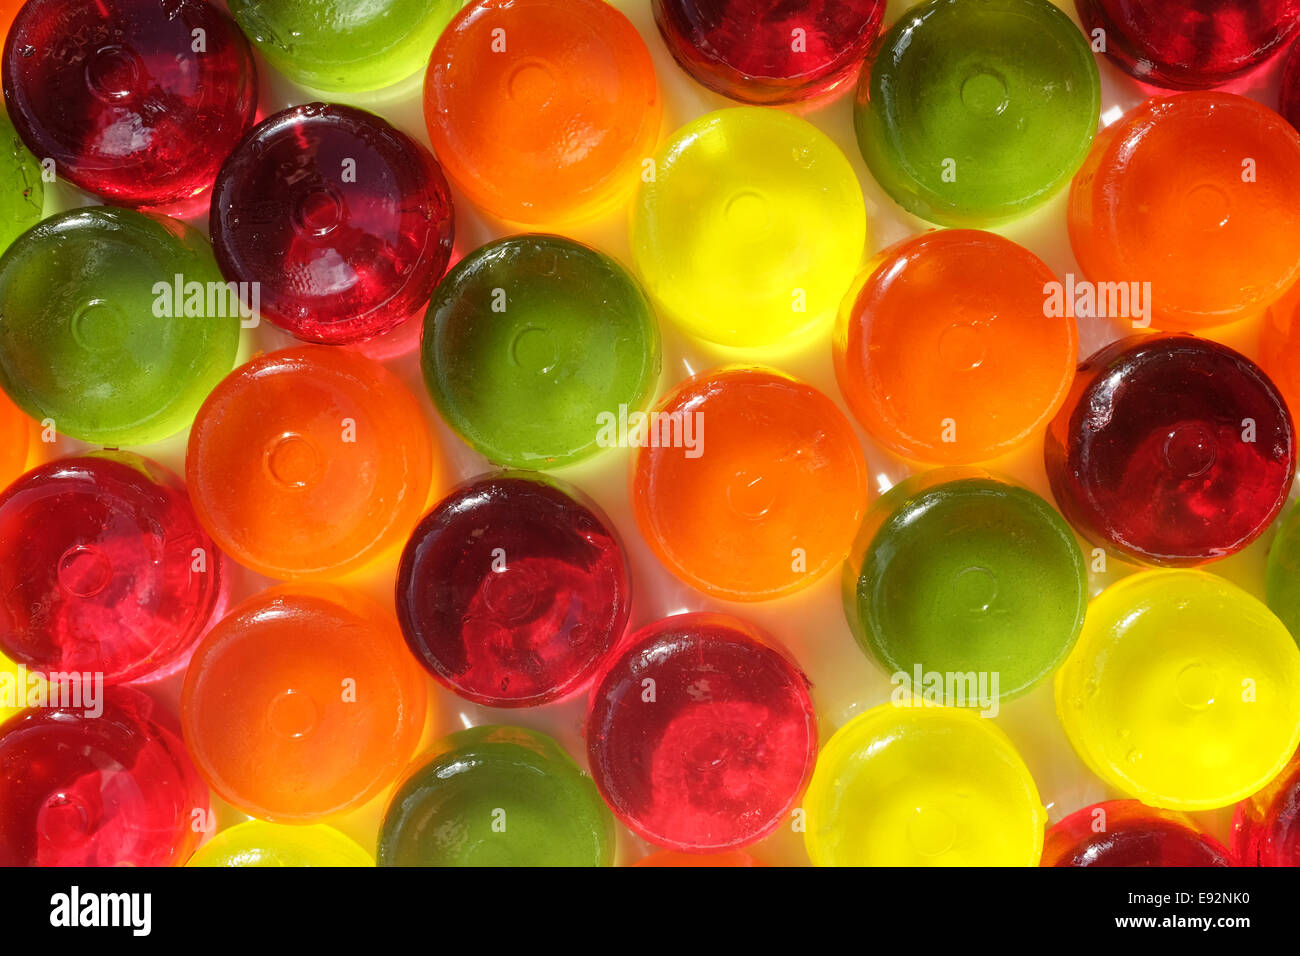 Multi-coloured boiled sweets as an abstract background texture Stock Photo